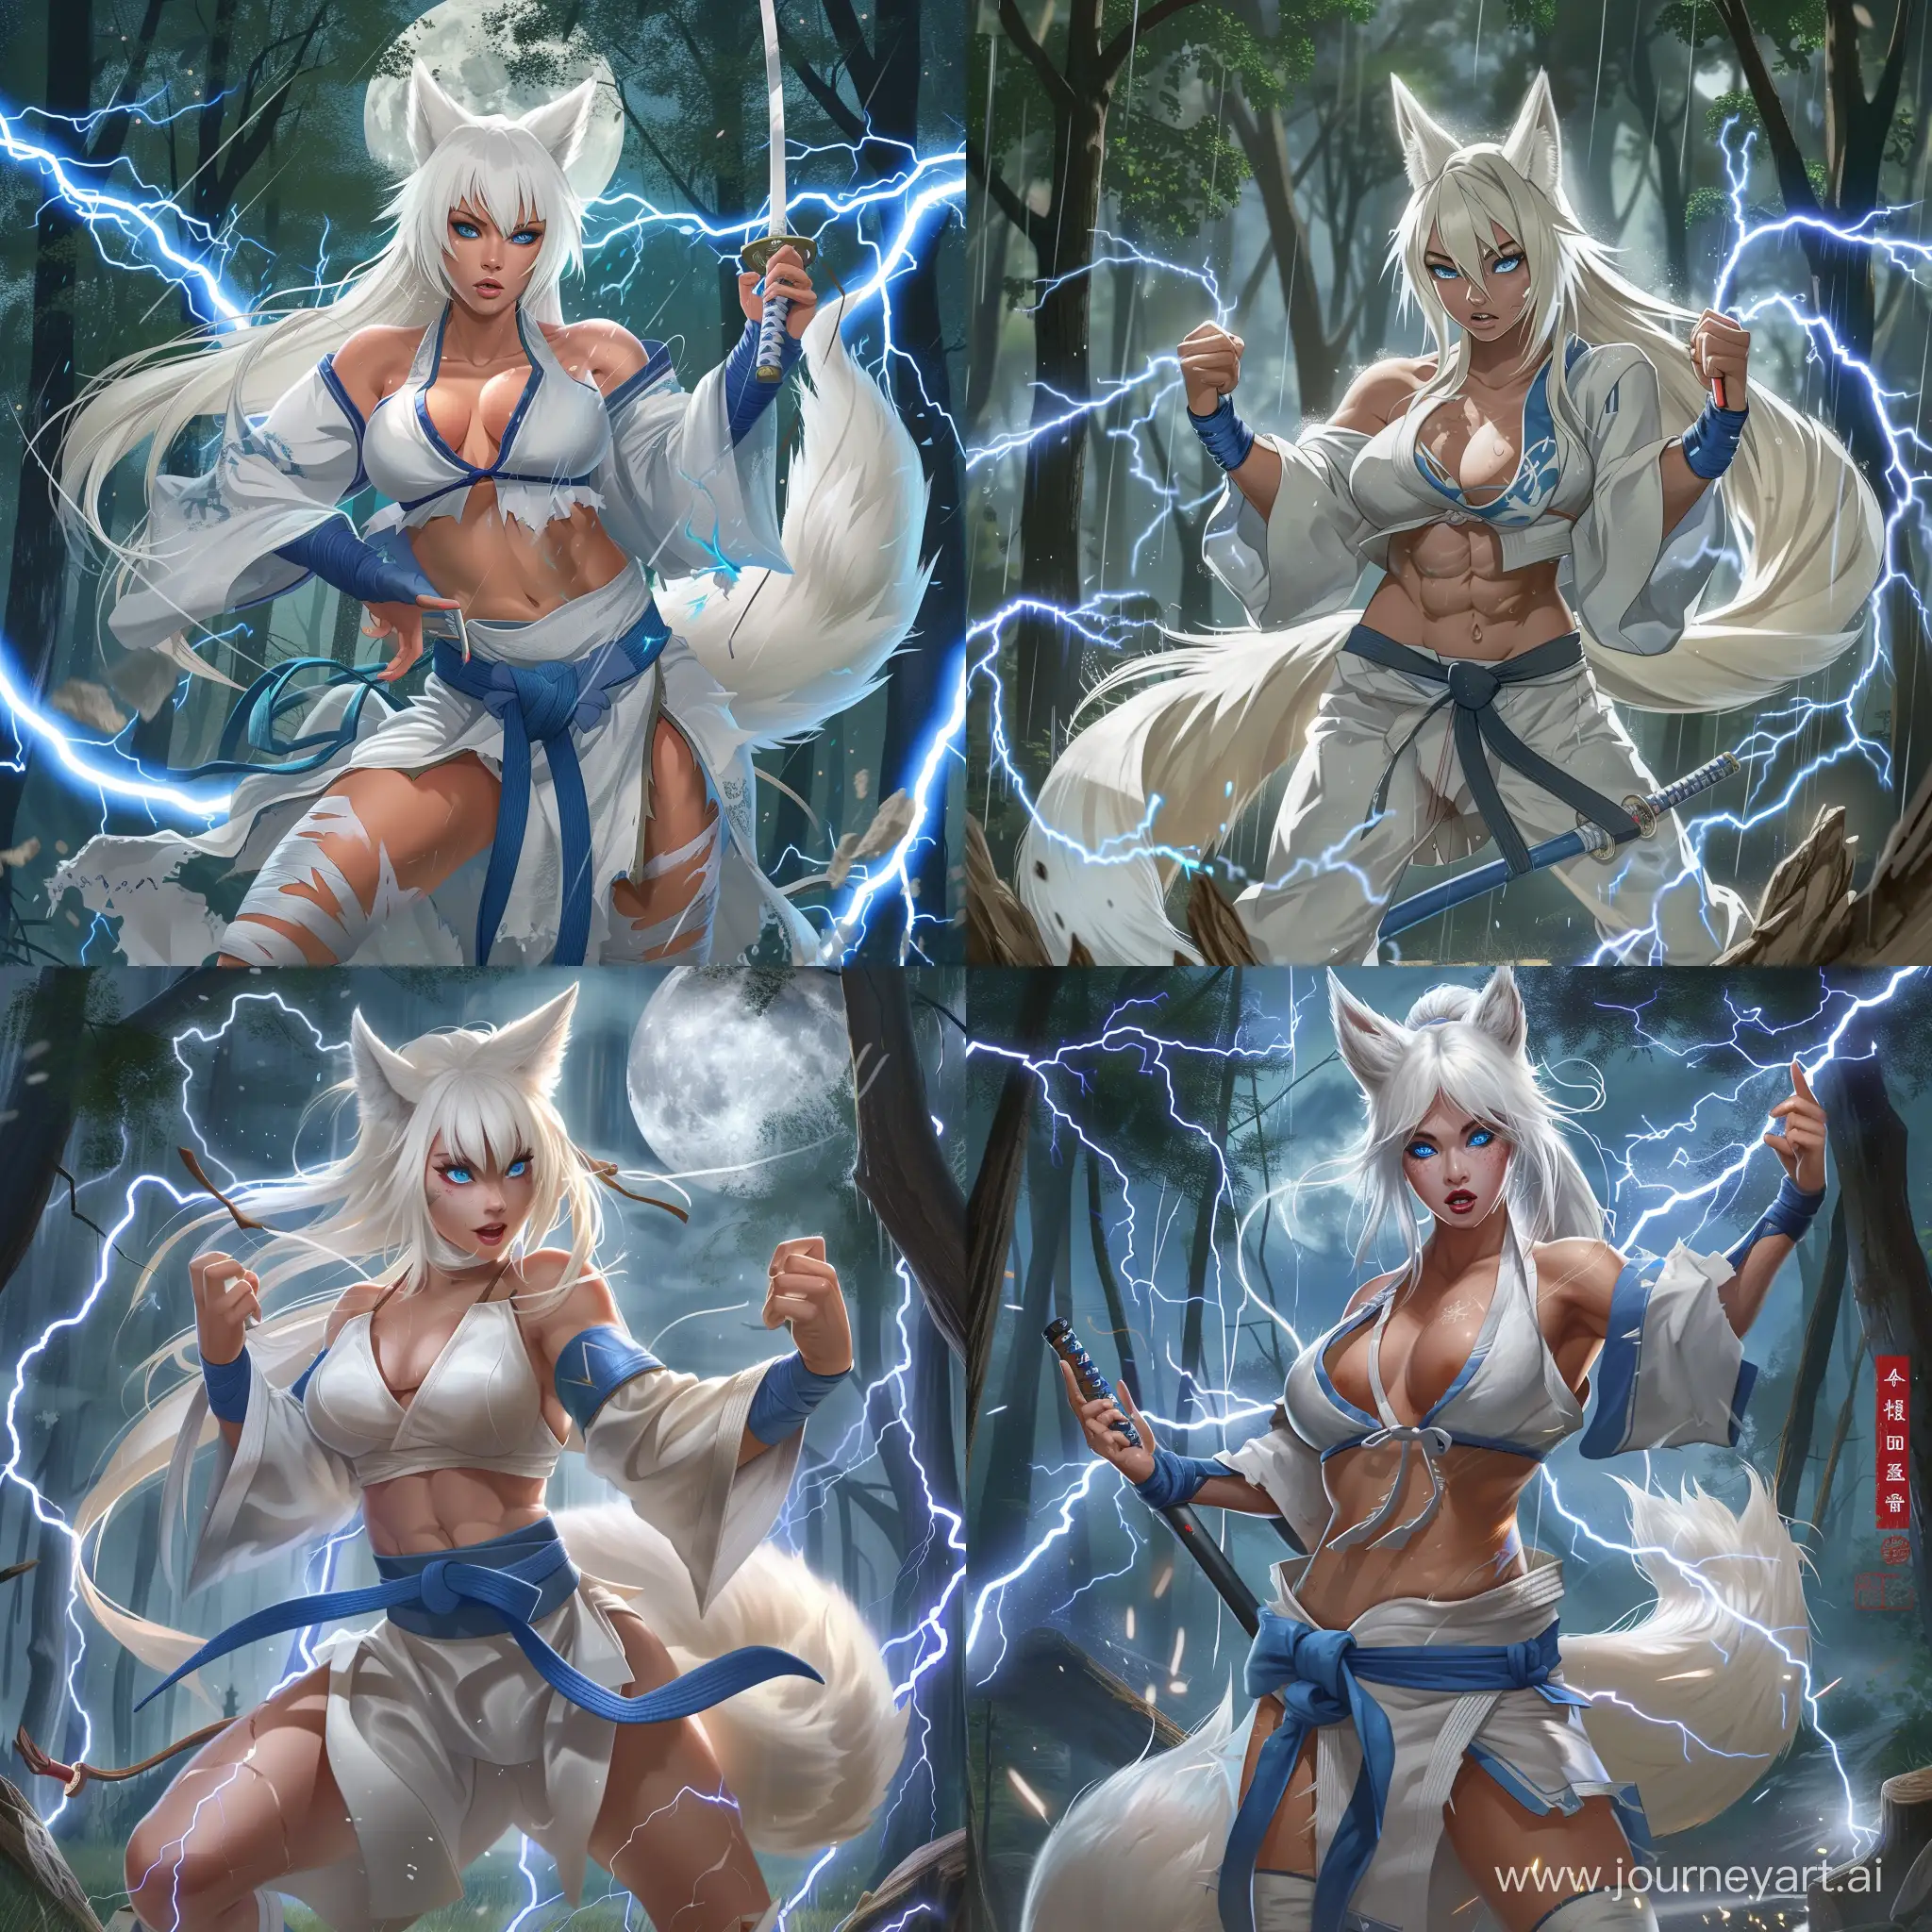 anime-style, full body, athletic, muscular, tan skin, adult, asian woman, long white hair, white fox ears, white fox tail attached to her waist, fierce blue eyes, wearing a white and blue martial arts gi, baggy martial arts pants, white chest wrap, holding a katana, dynamic, blue wristwraps, blue footwraps, using lightning magic, surrounded by lightning, forest, night, full moon